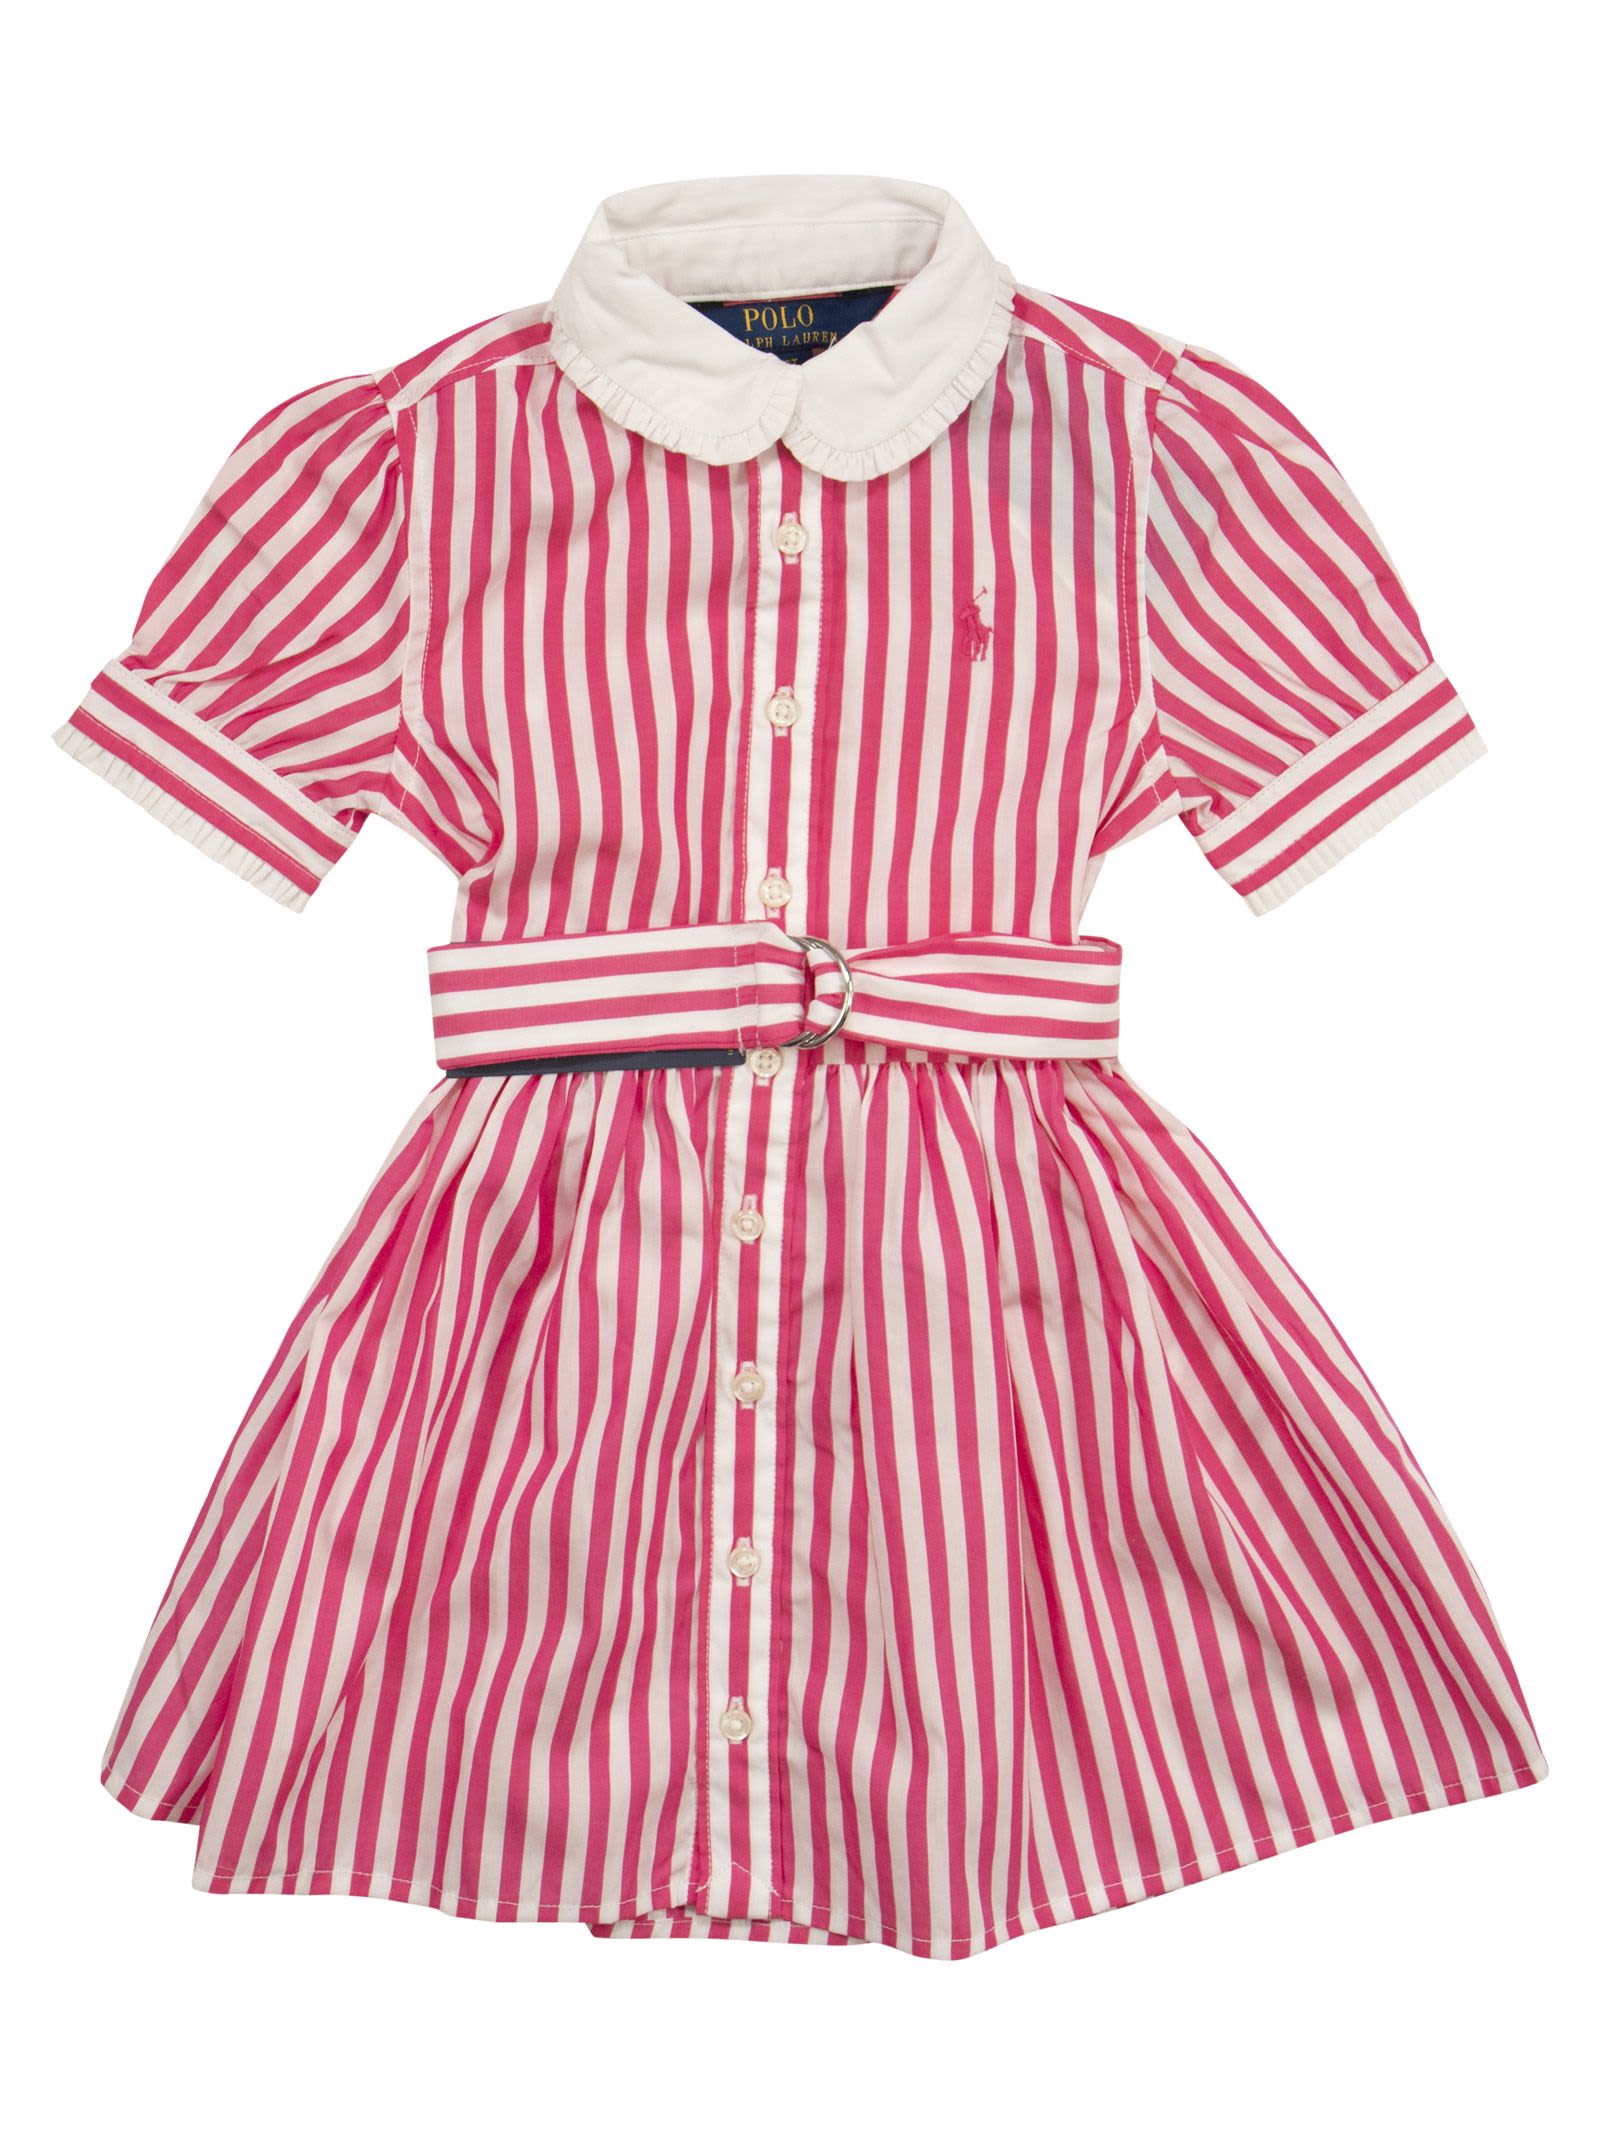 Polo Ralph Lauren Kids' Striped Cotton Chemisier With Belt In Pink/white